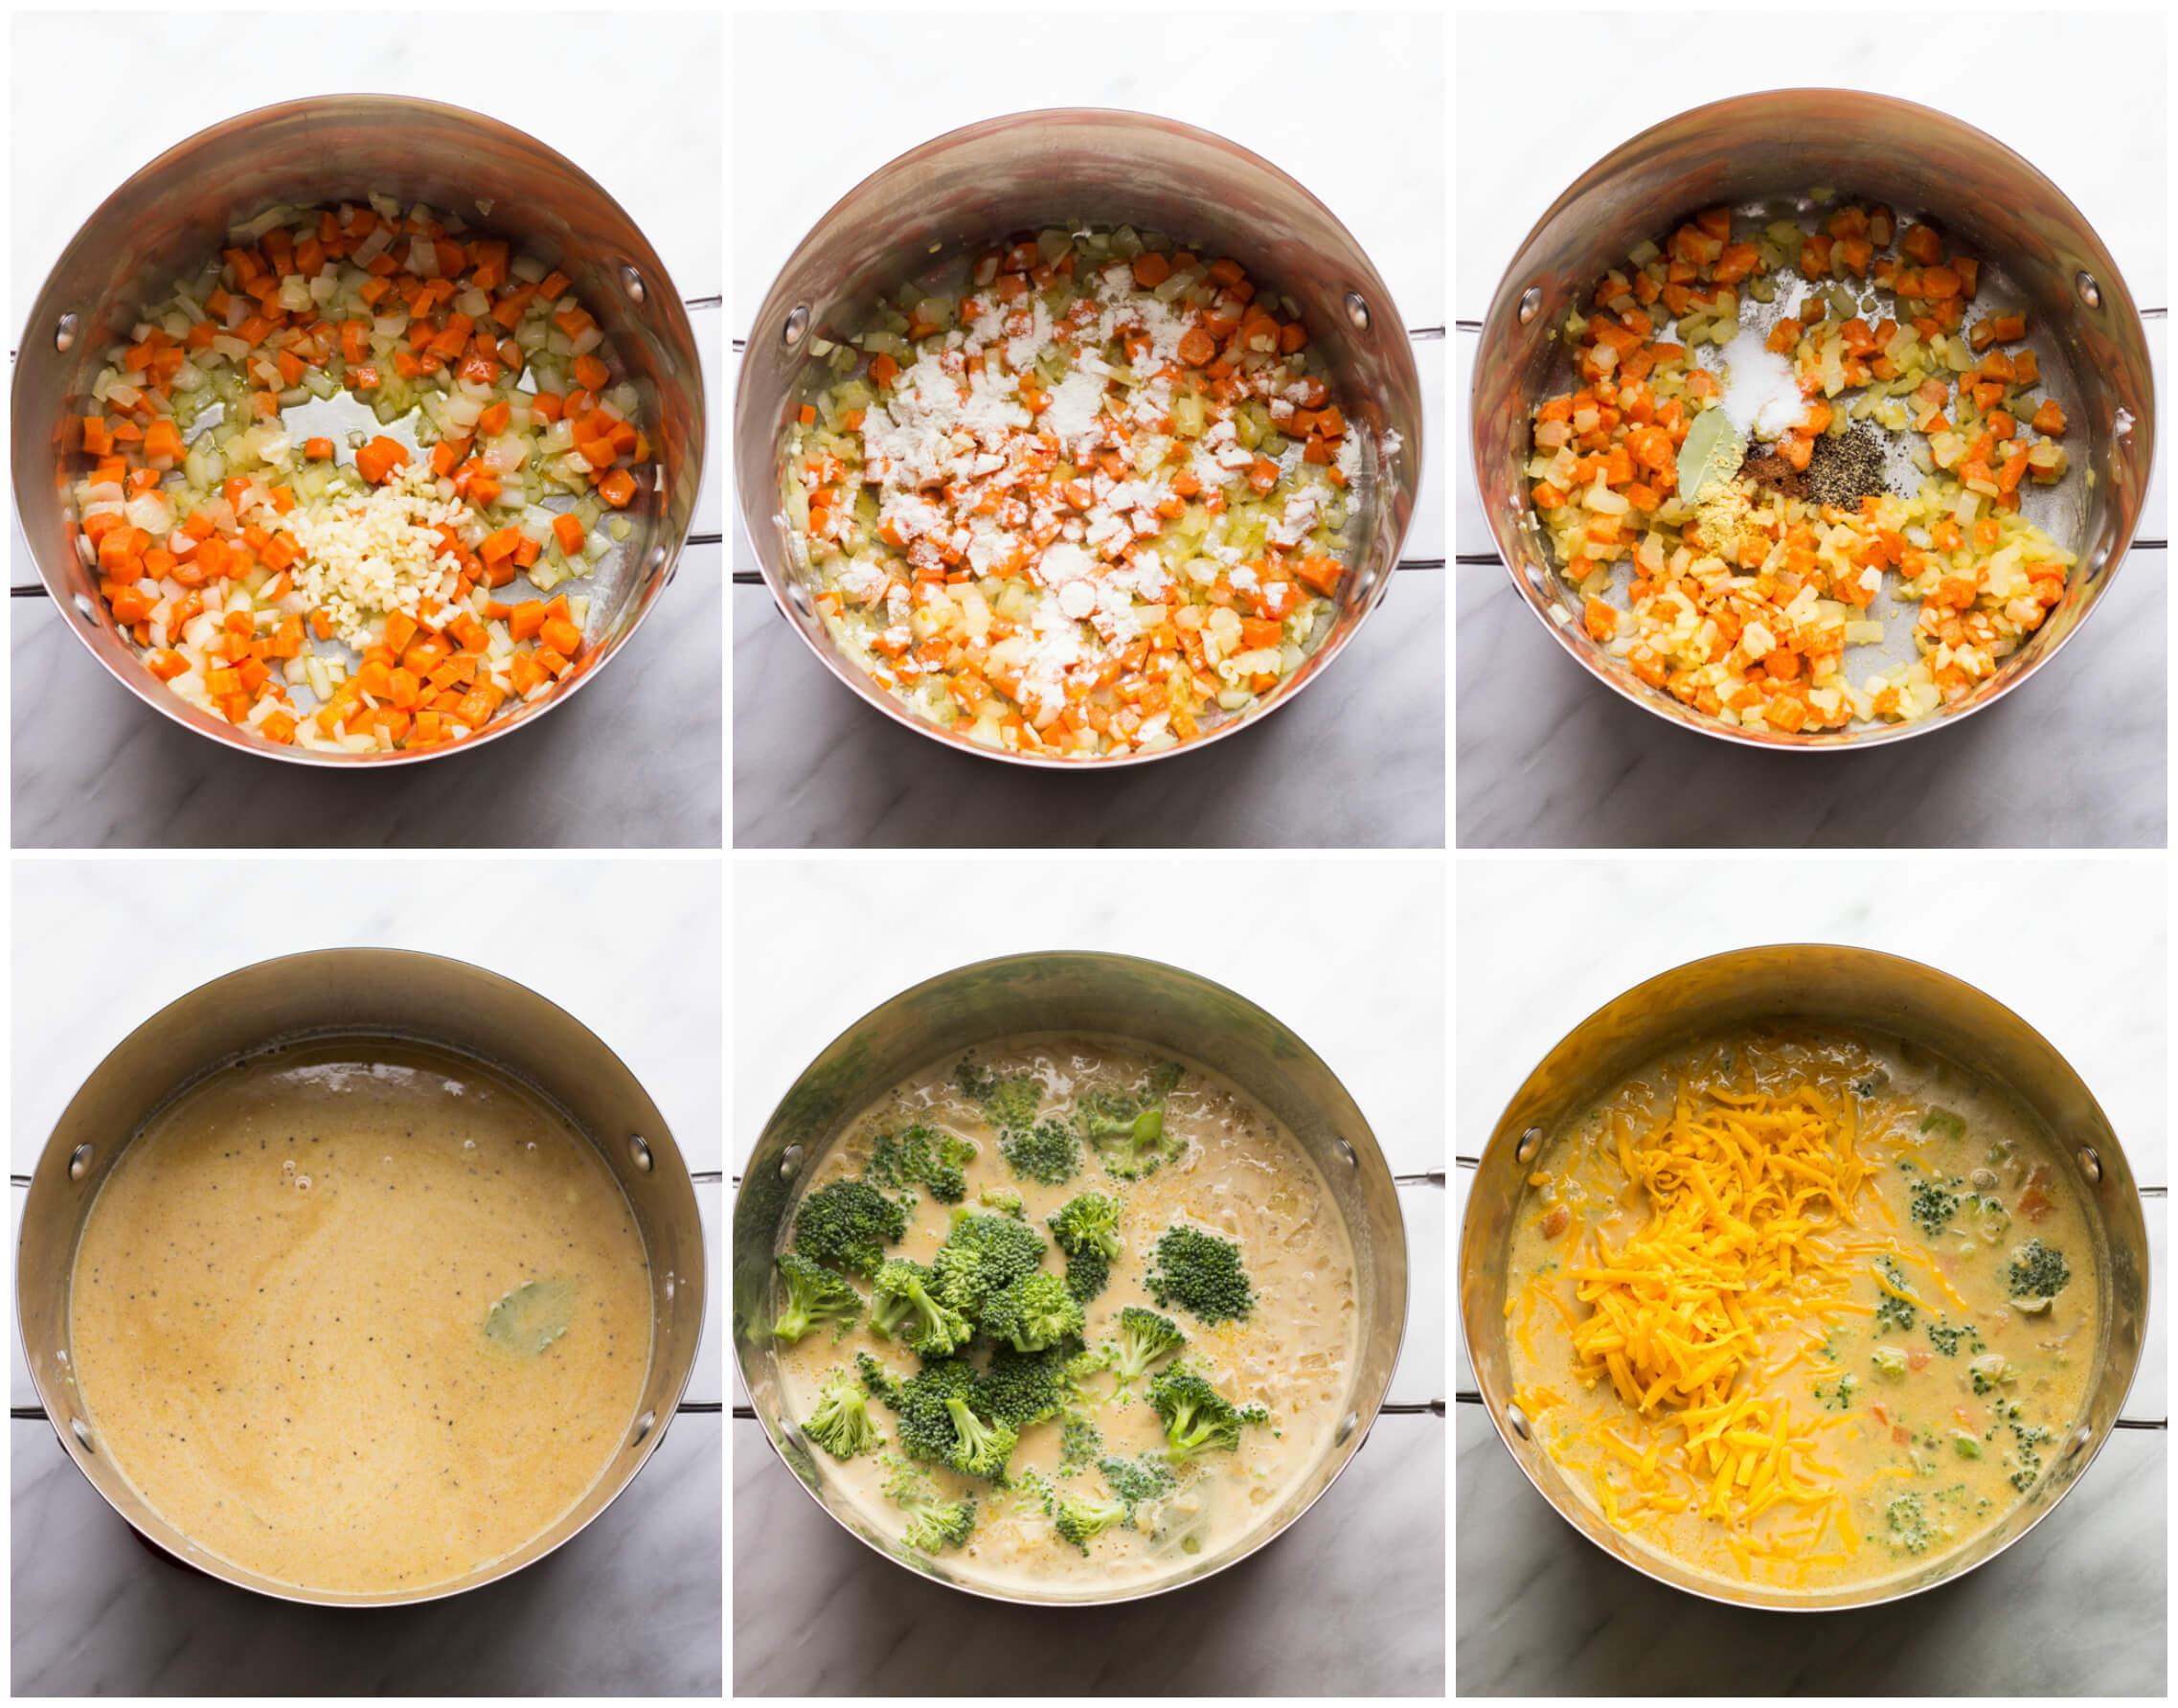 Step by step on how to make healthy broccoli cheddar soup